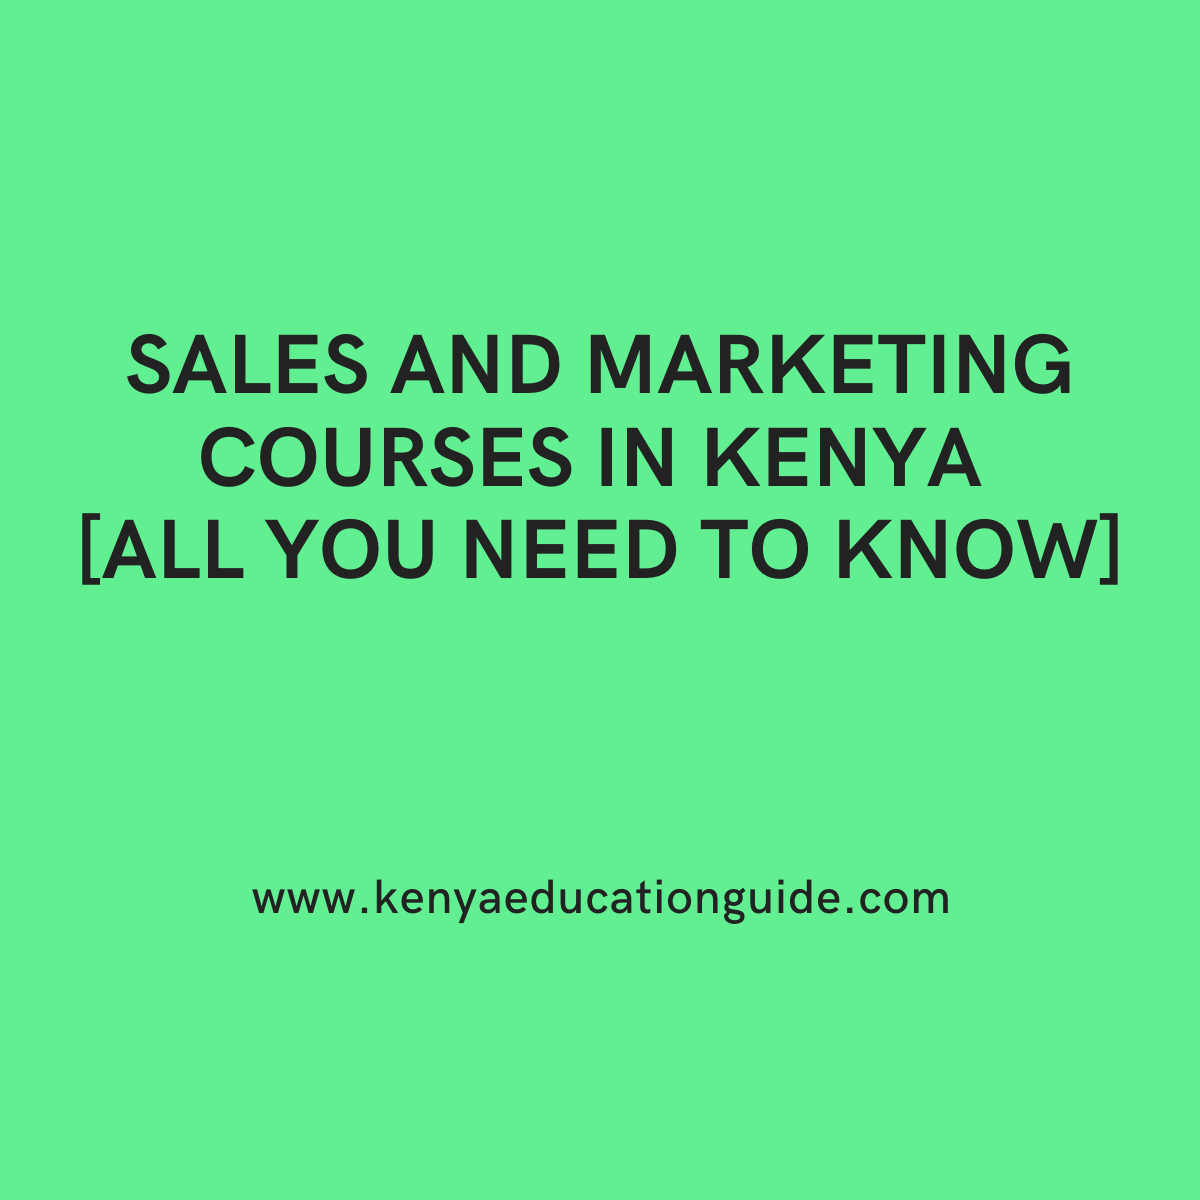 Sales and marketing courses in Kenya